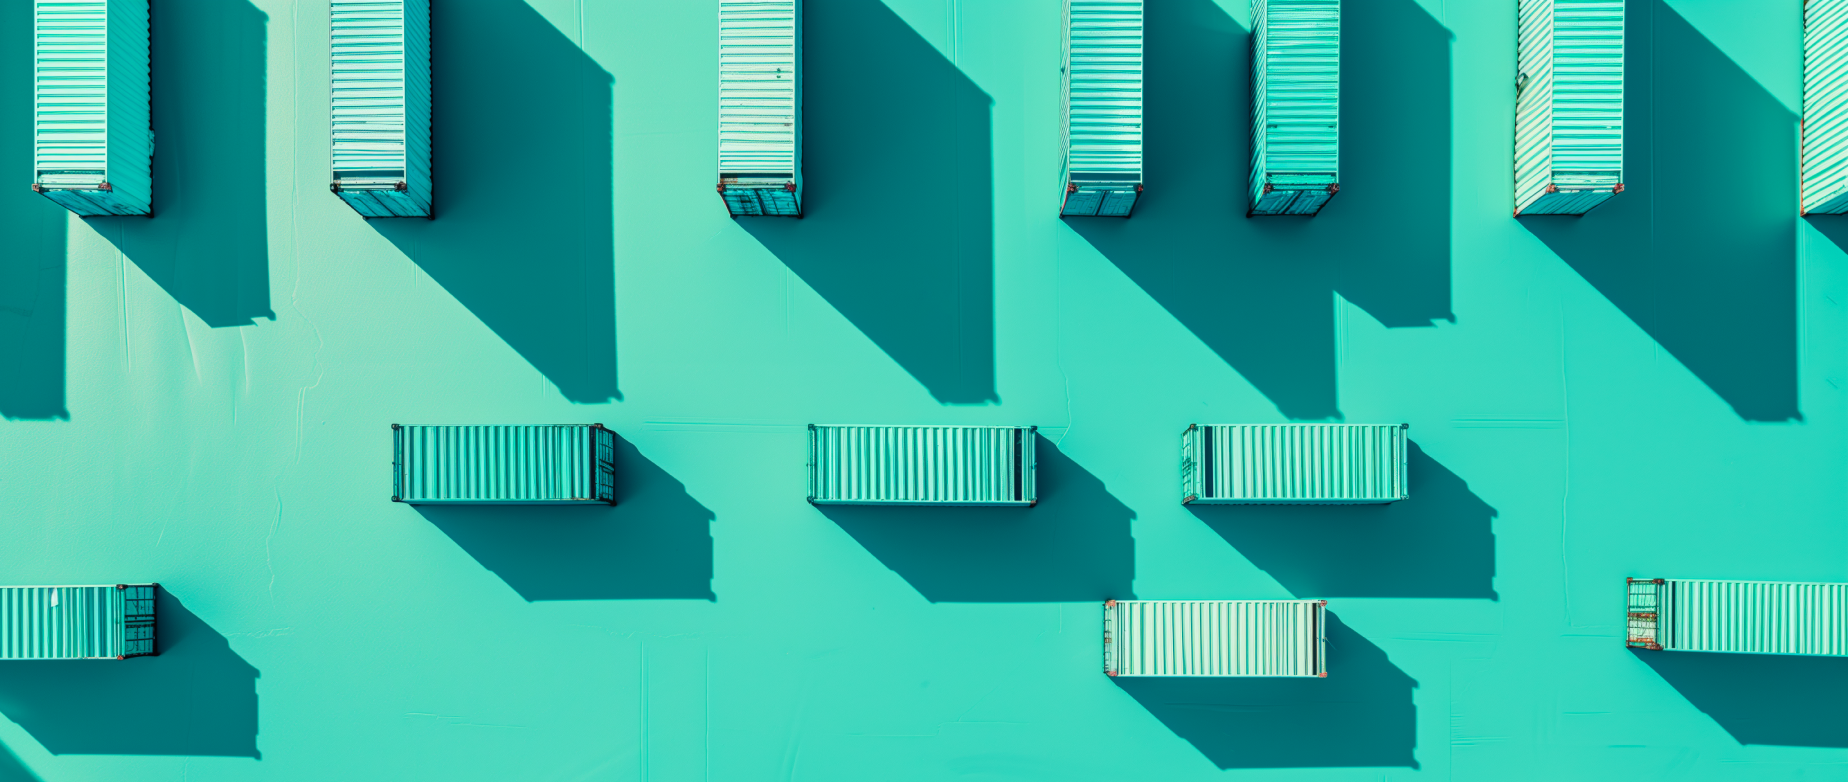 An arrangement of cargo containers on a teal background.